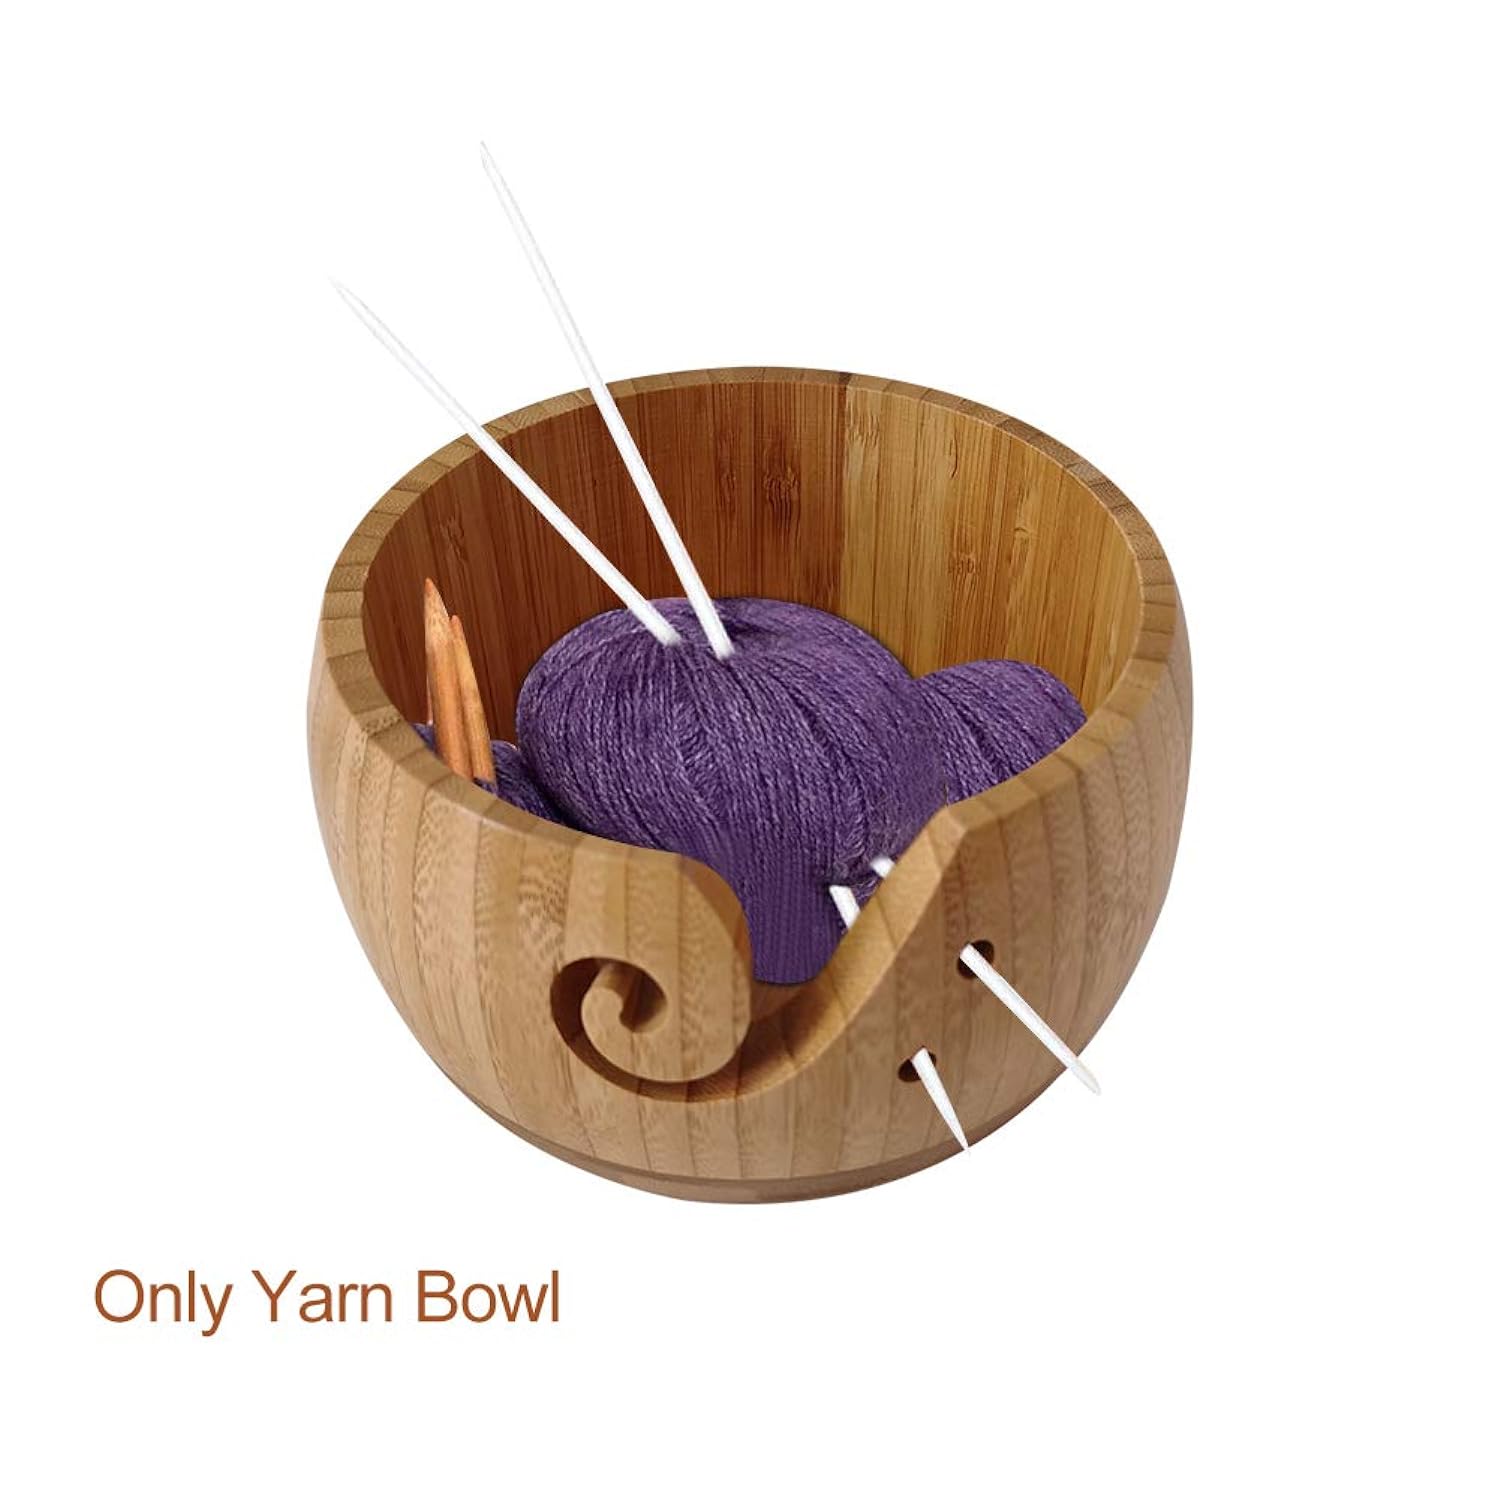 Great Choice Products Yarn Storage Bowl, Wool Storage Bowl With Lid Wooden Yarn Organizer Handmade Craft Crochet Bowl Holder With Holes For Knittin…